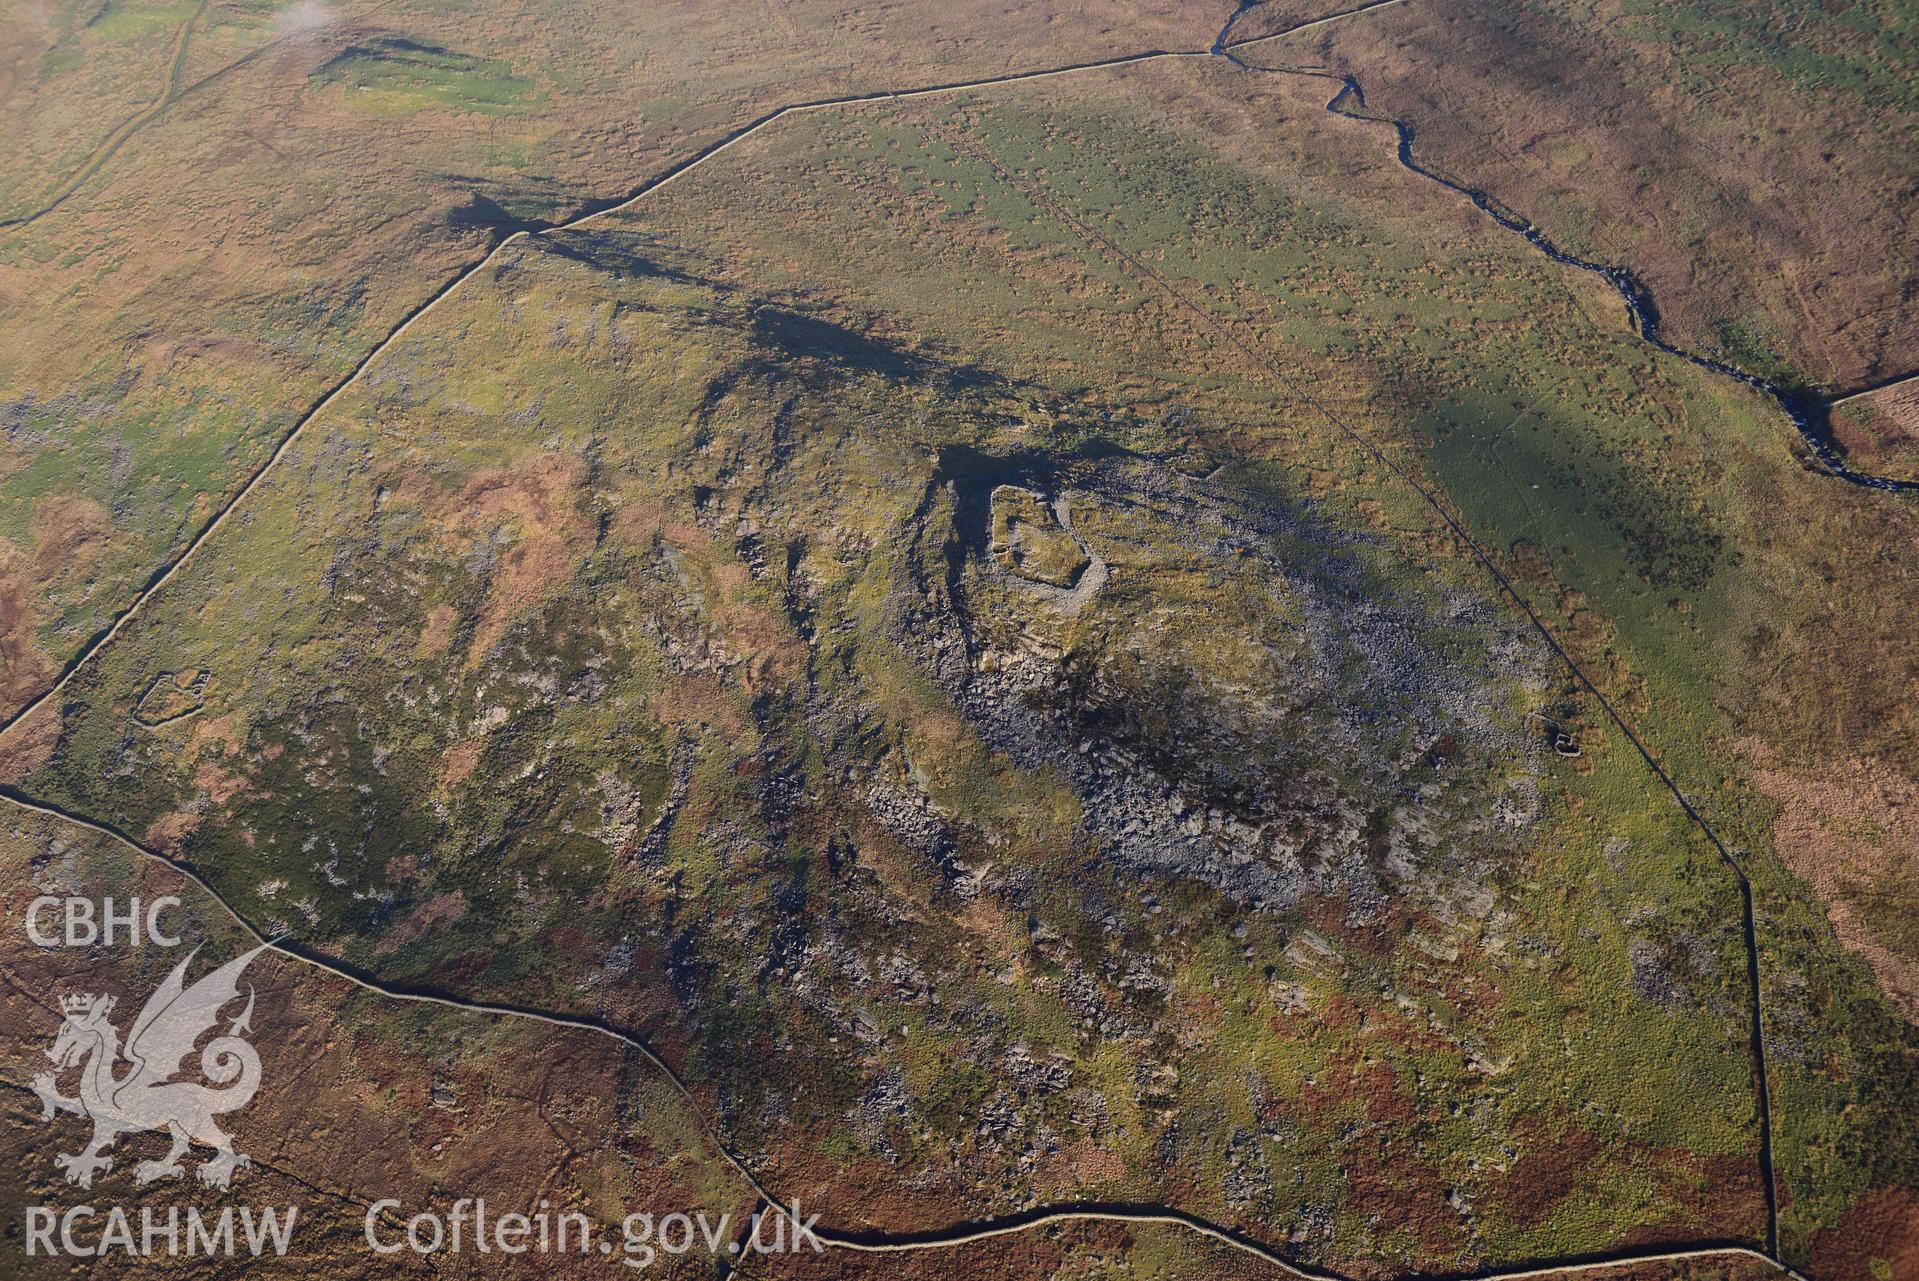 Oblique aerial photograph of Craig y Dinas hillfort and landscape, taken during the Royal Commission